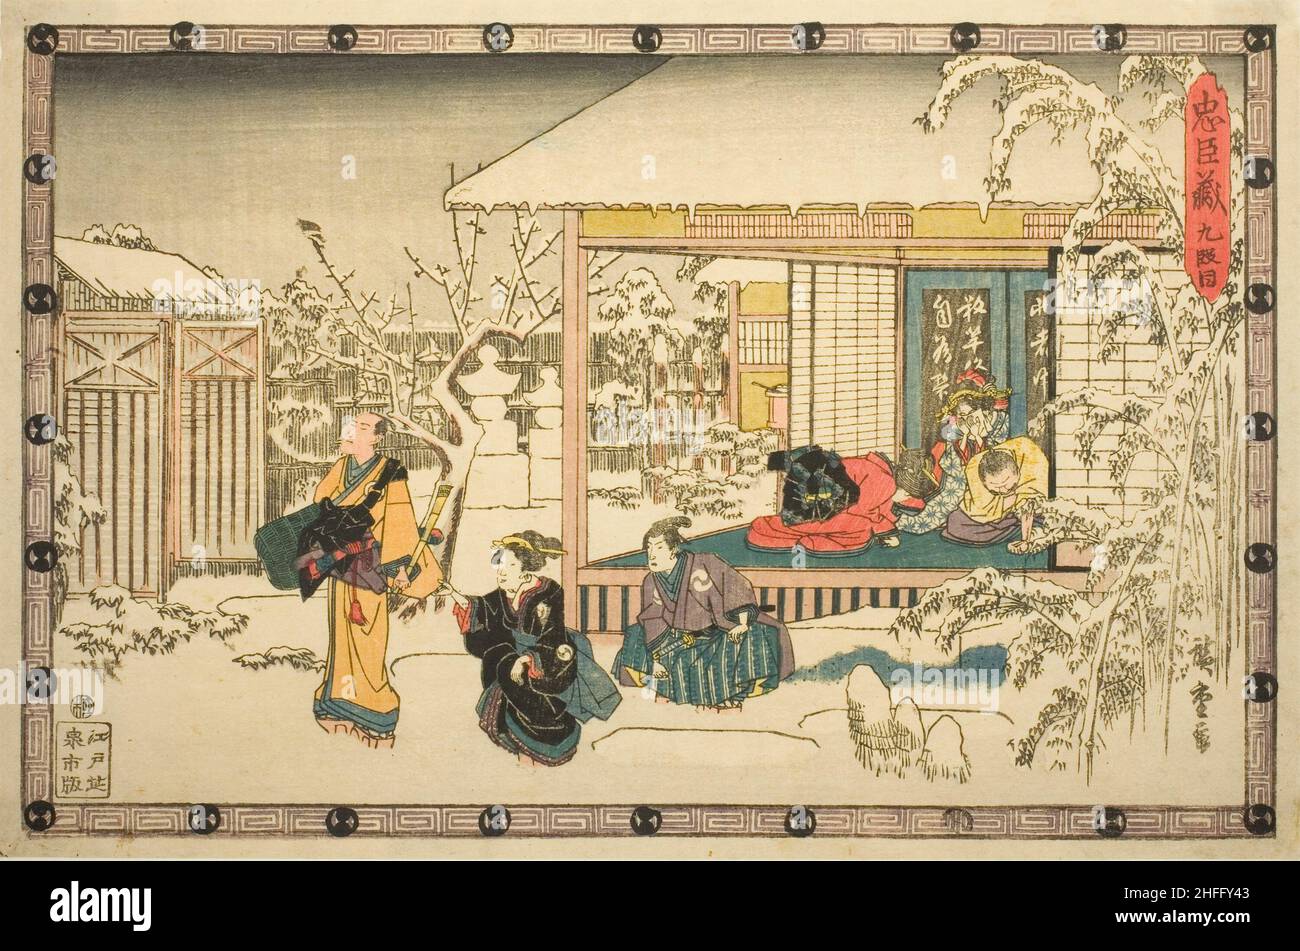 Act 9 (Kyudanme), from the series &quot;The Revenge of the Loyal Retainers (Chushingura)&quot;, c. 1834/39. In a snow-covered courtyard, Honzo has committed seppuku in the presence of his wife and daughter. Kuranosuke dons the disguise of a Buddhist monk and leaves his weeping wife and son Rikiya kneeling in the snow. Stock Photo